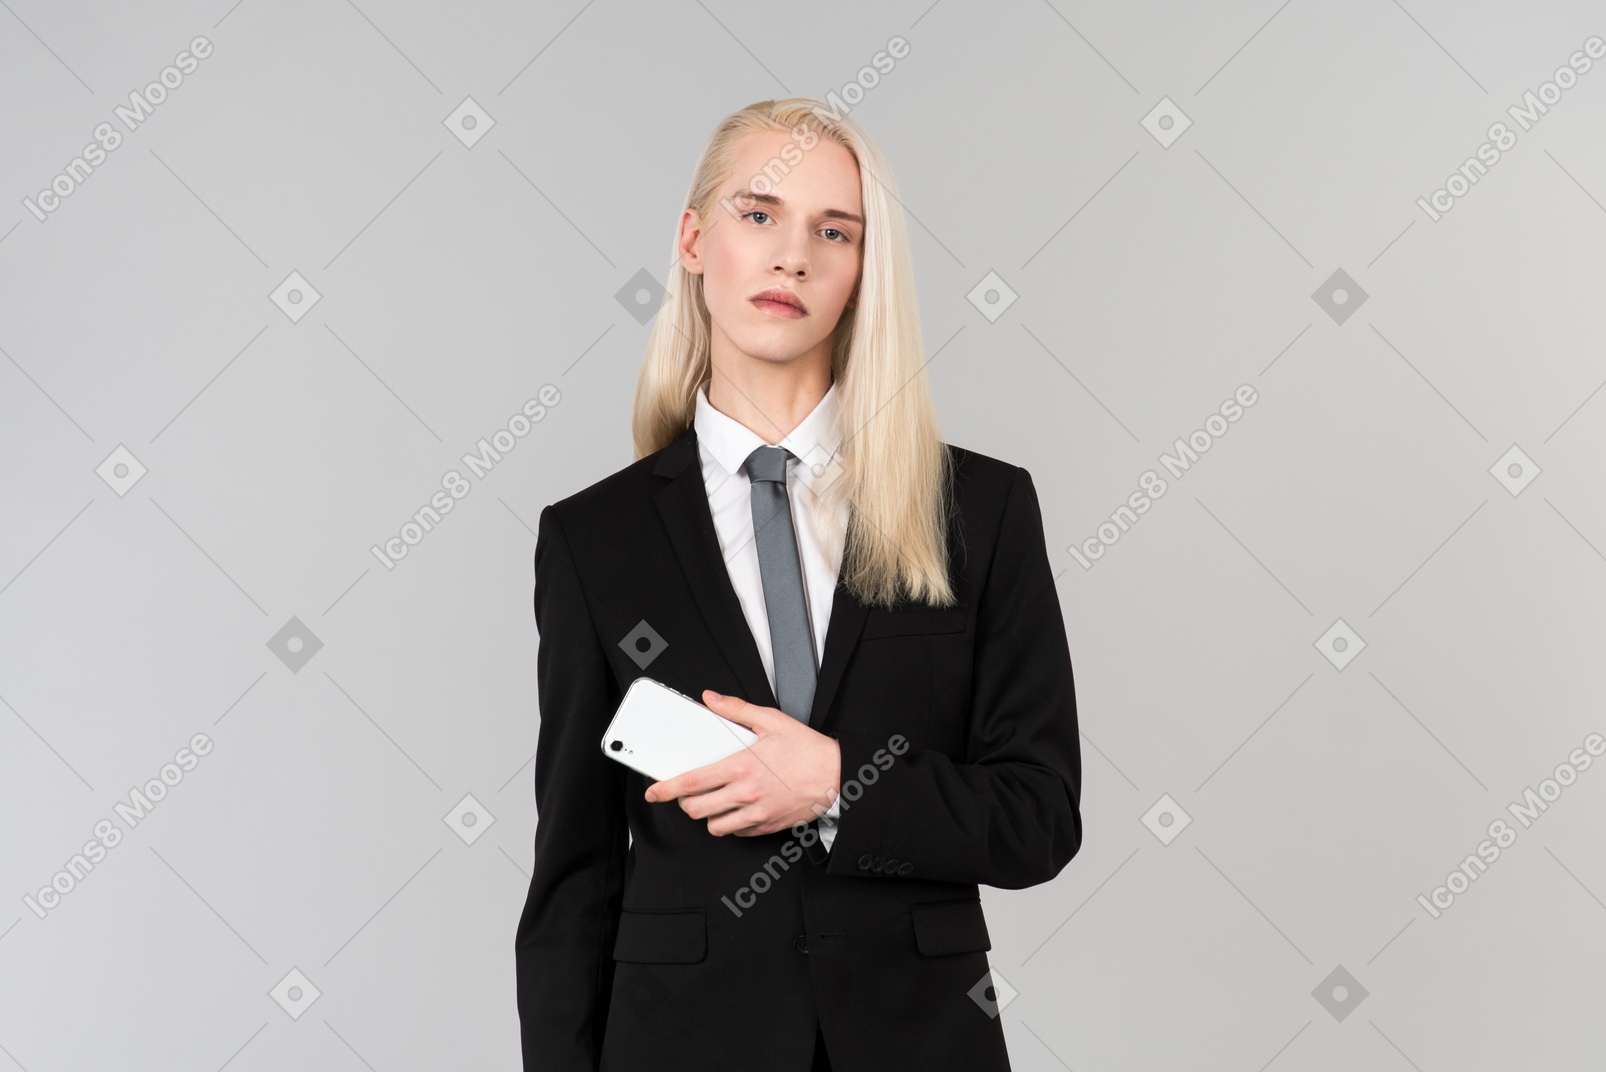 Young good-looking man with long blond hair, in a black suit and a tie, standing against the plain grey background